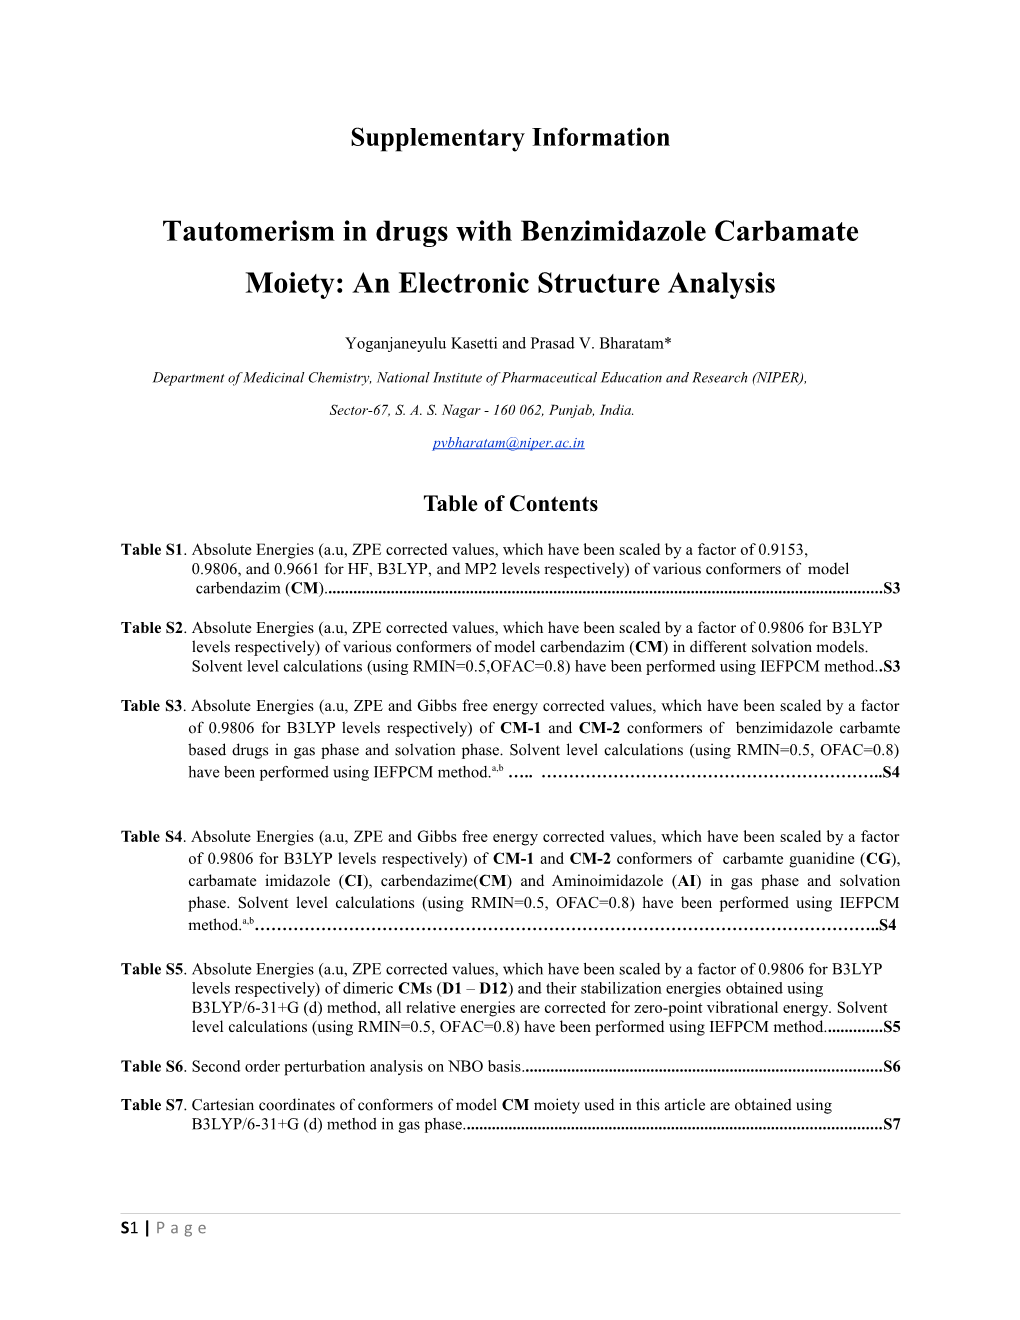 Tautomerism in Drugs with Benzimidazole Carbamate Moiety: an Electronic Structure Analysis